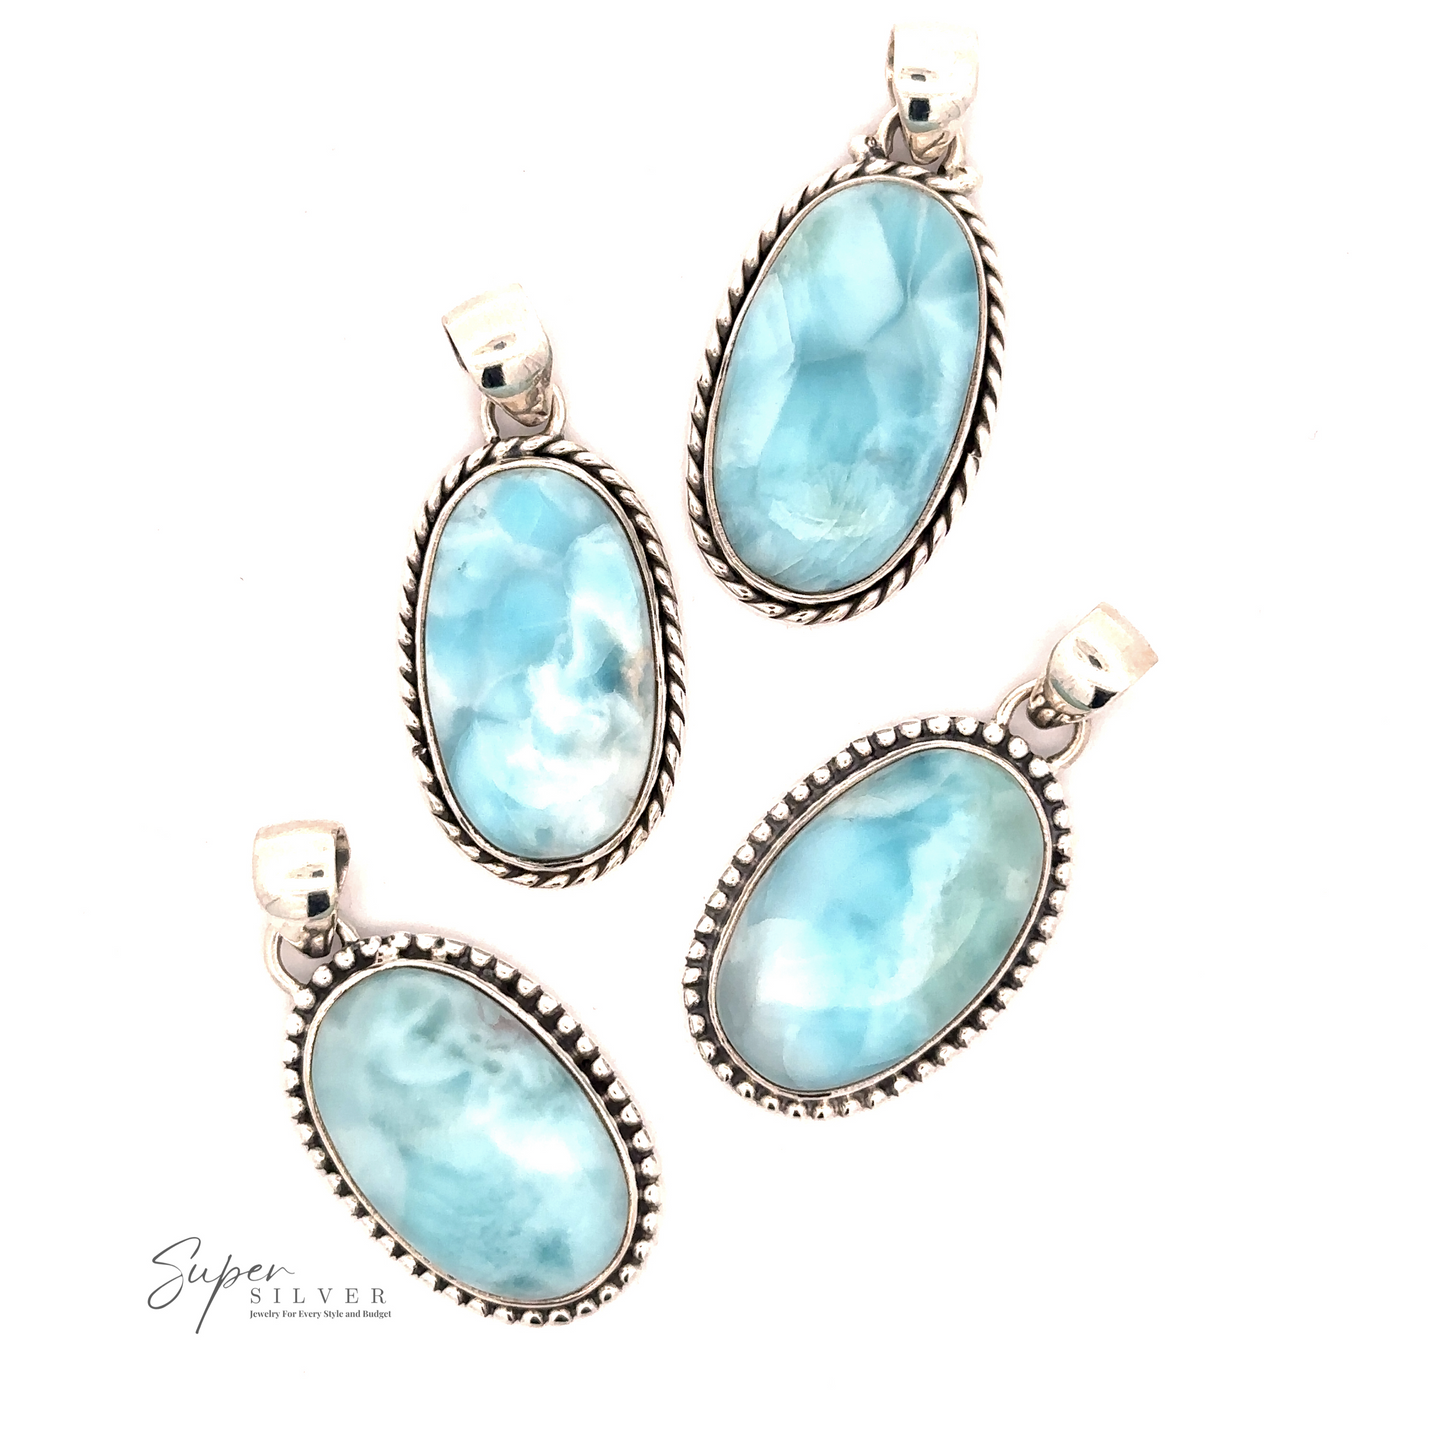 
                  
                    Four Larimar Oval Pendants with Ball or Rope Border featuring oval-shaped blue larimar stones are arranged on a white background. The text "Super Silver" is visible in the lower-left corner.
                  
                